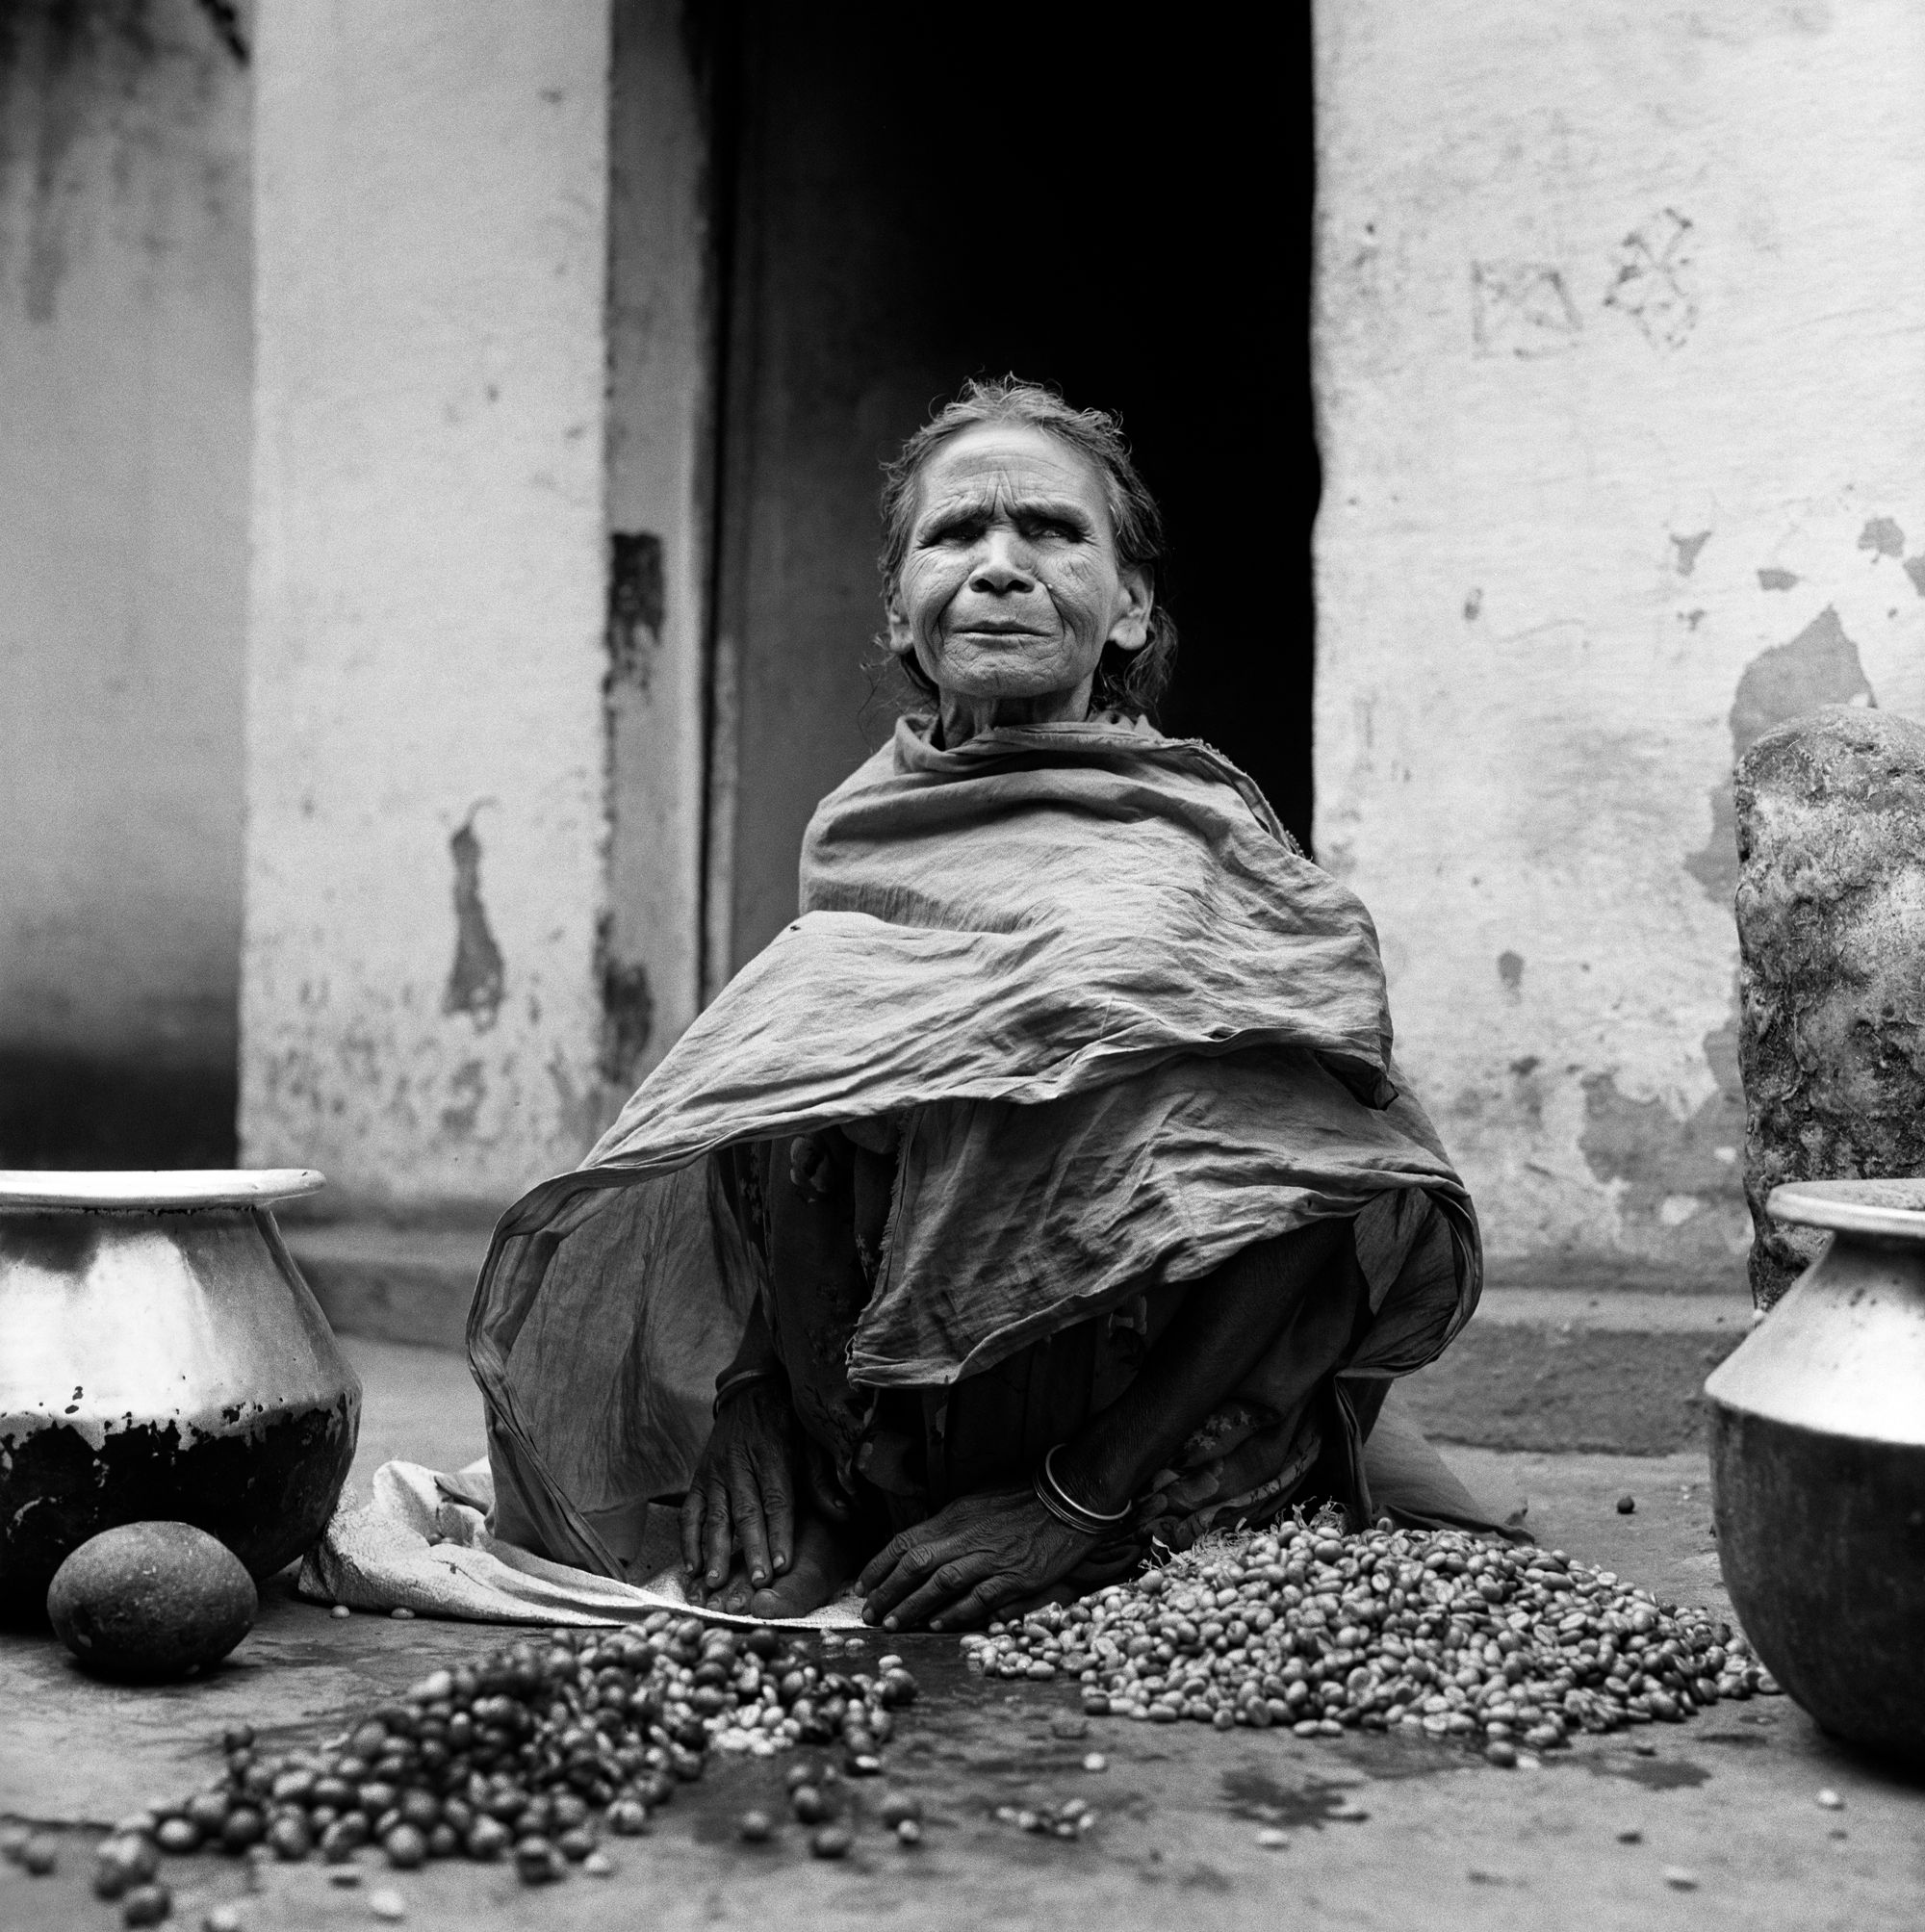 Black and white photo of an older woman, seated in front of a doorway. Her face is expressively wrinkled, perhaps with the start of a smile. Her eyes are shaded. She wears a shawl that covers her body and at her feet are piles of small fruit and large pots.